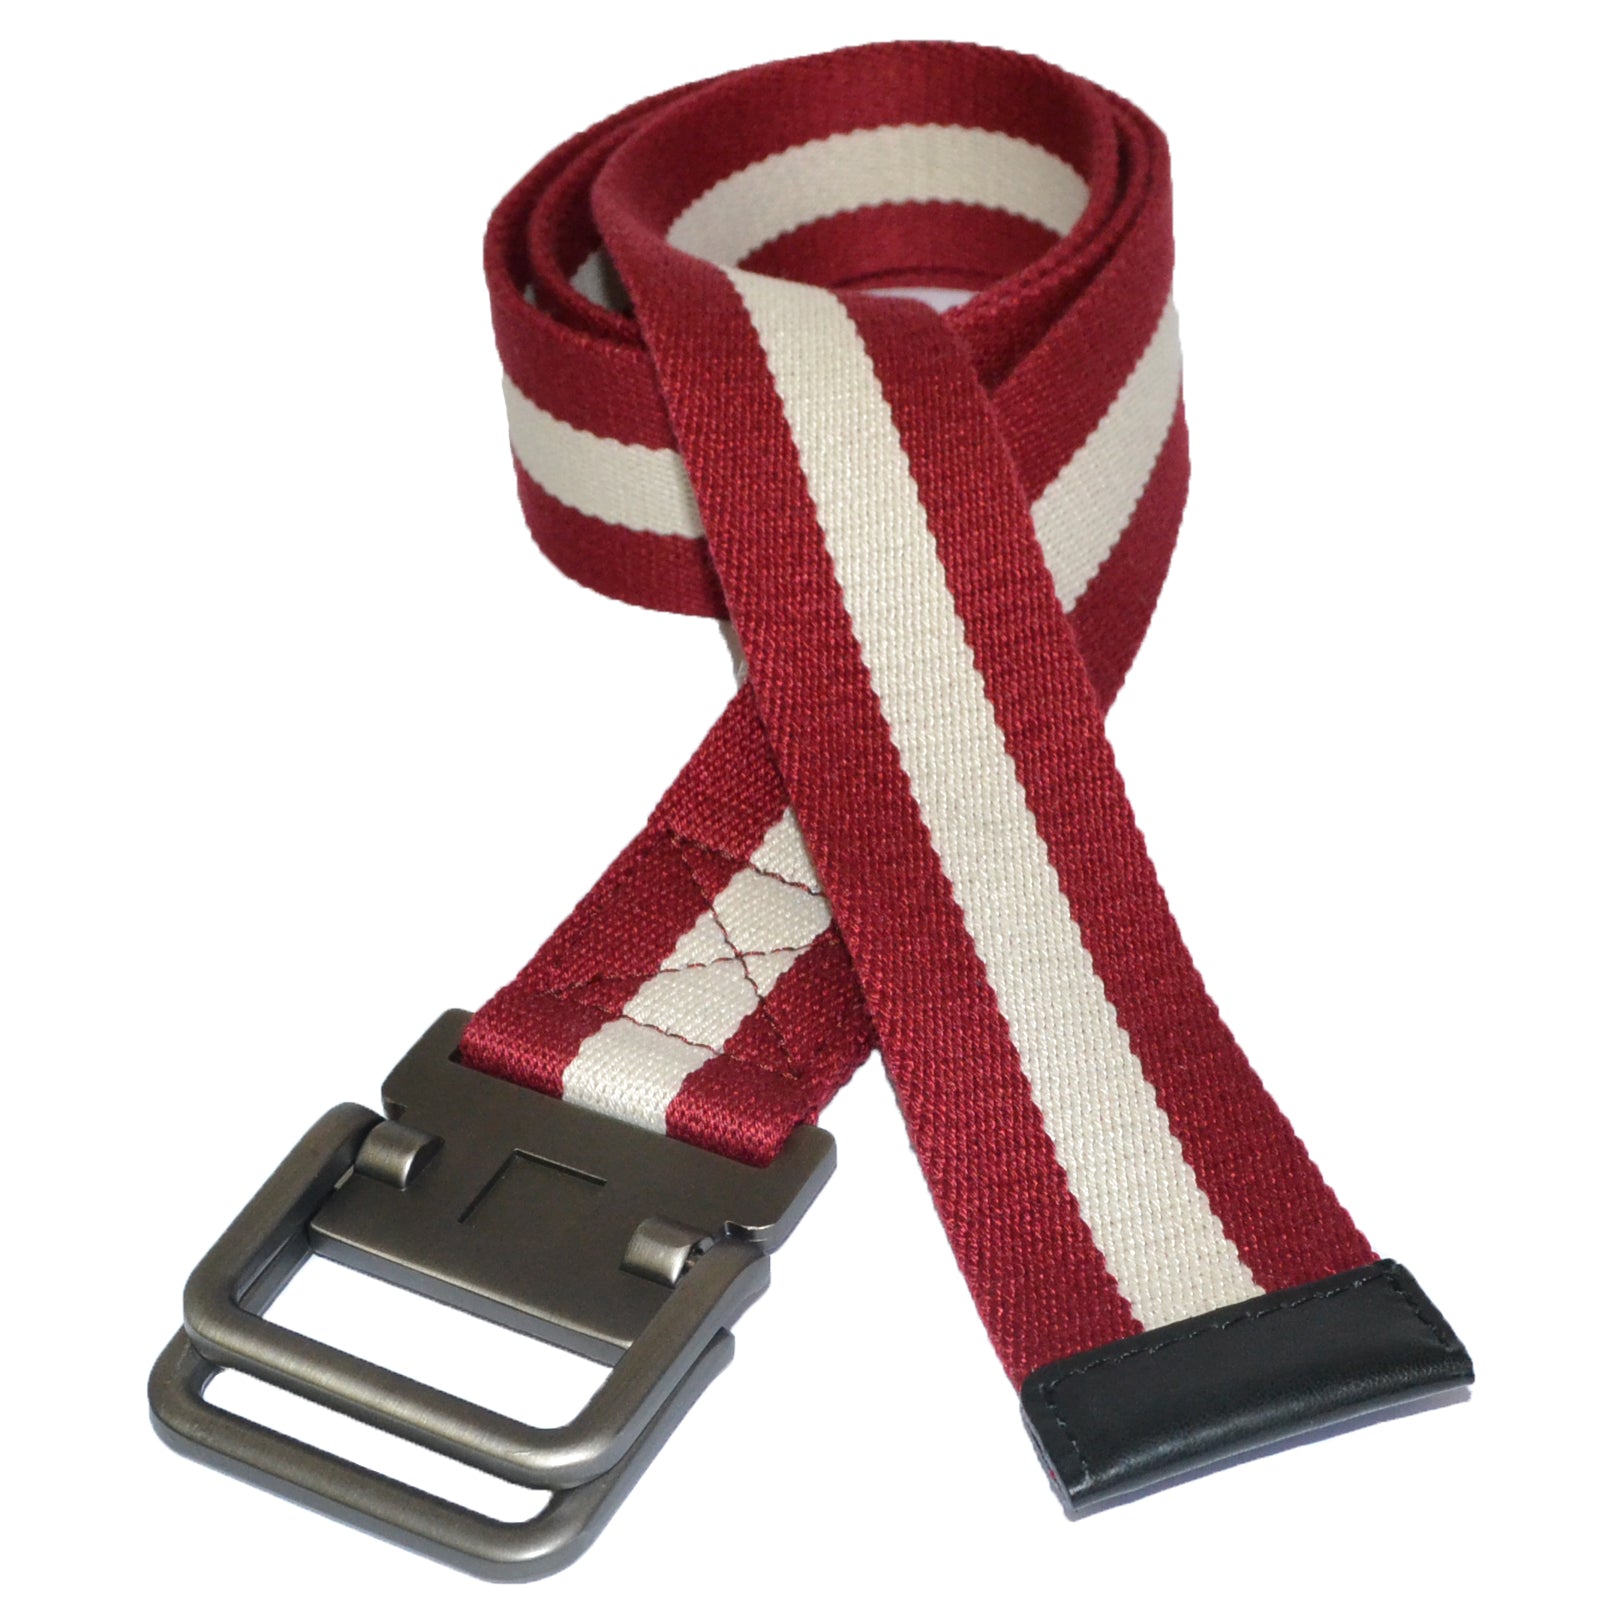 ZEUS - Mens Red and White Cotton Canvas Webbing Belt with Slide Through Buckle  - Belt N Bags